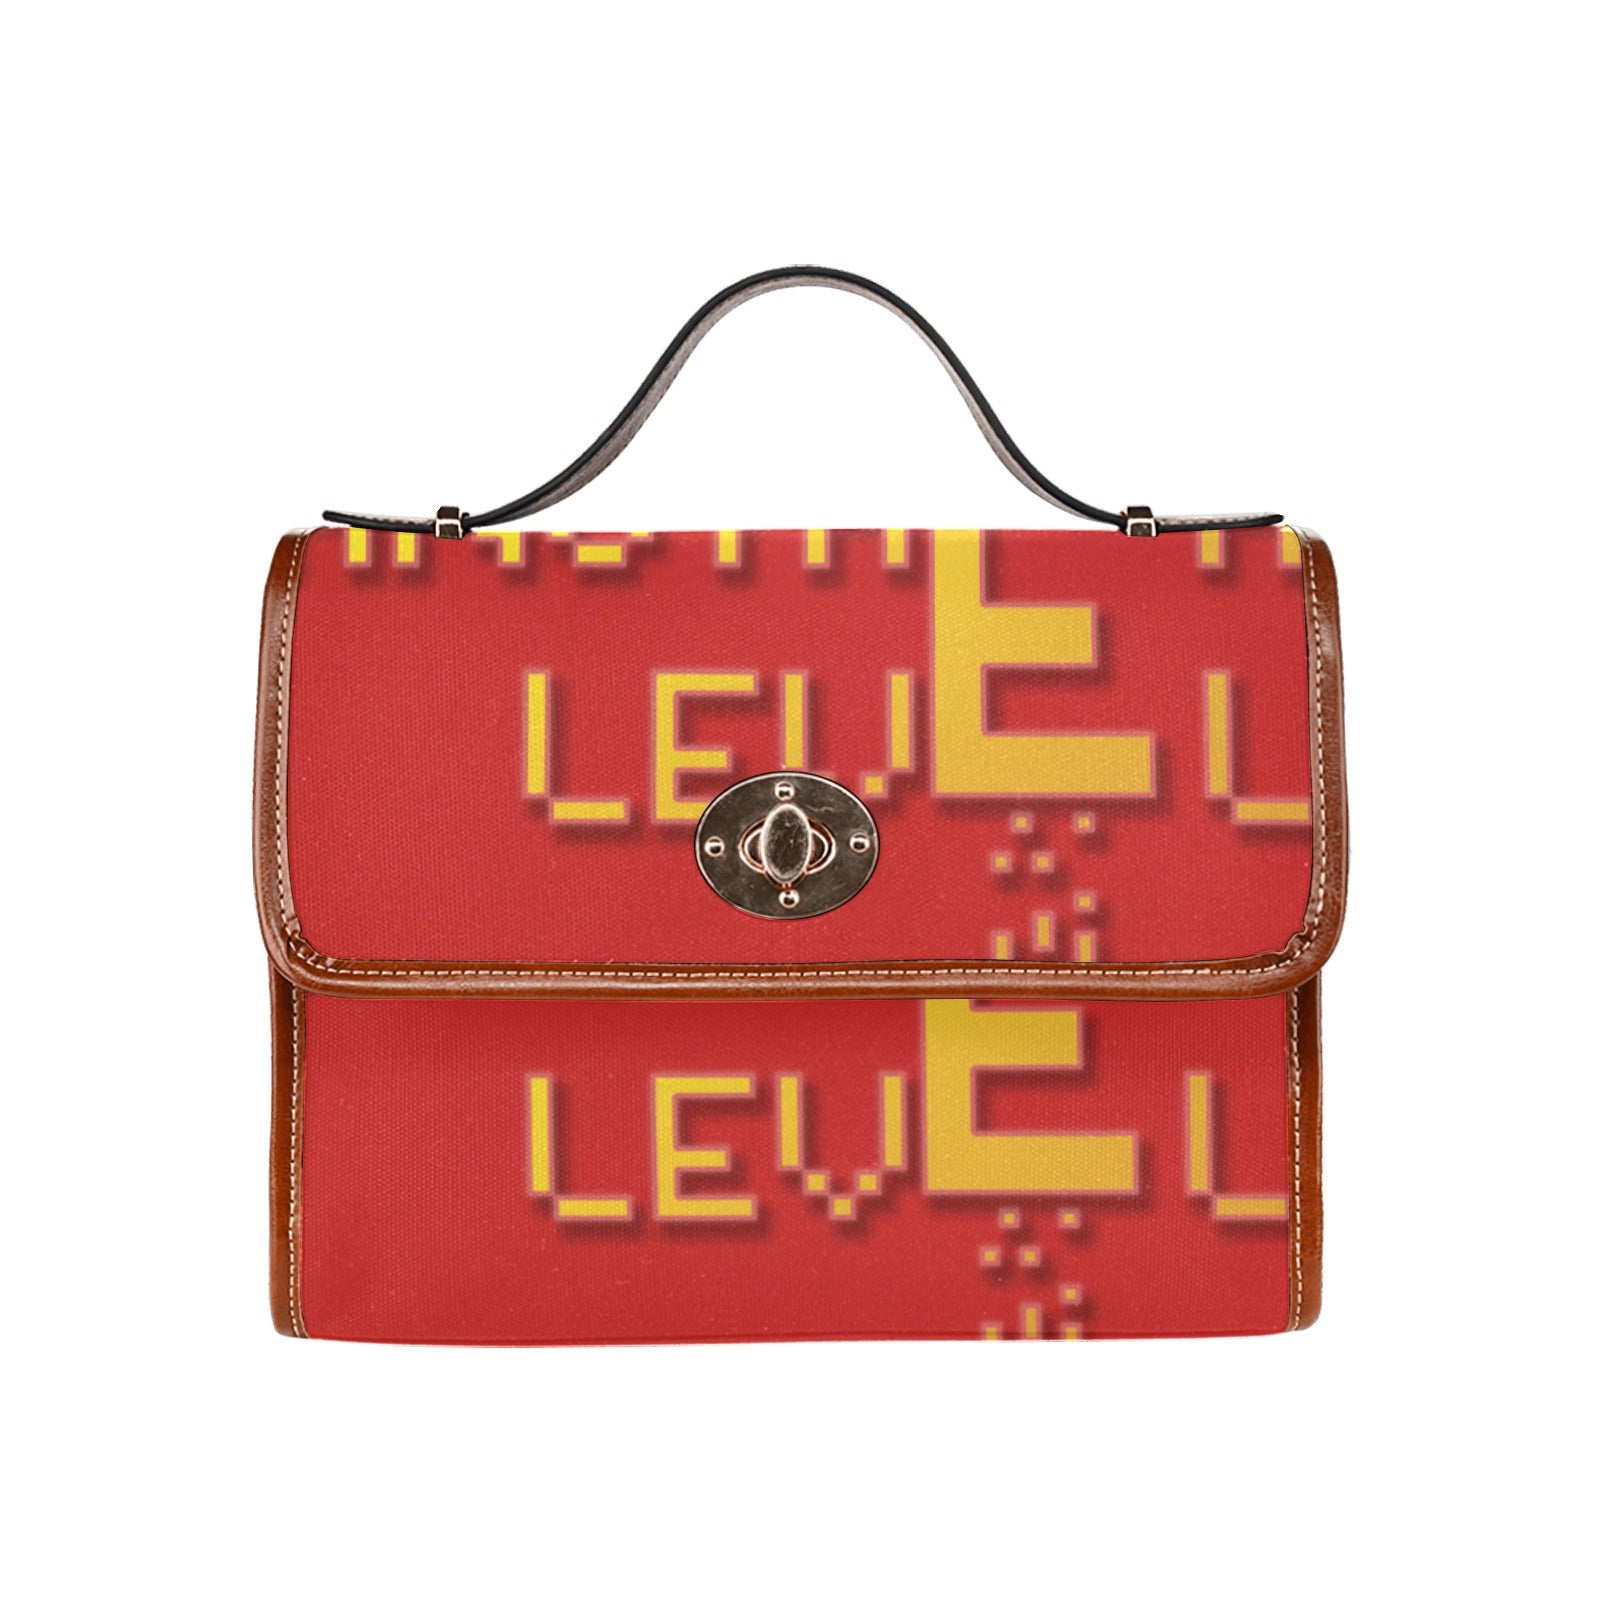 fz yellow levels handbag one size / fz - levels bag-red all over print waterproof canvas bag(model1641)(brown strap)